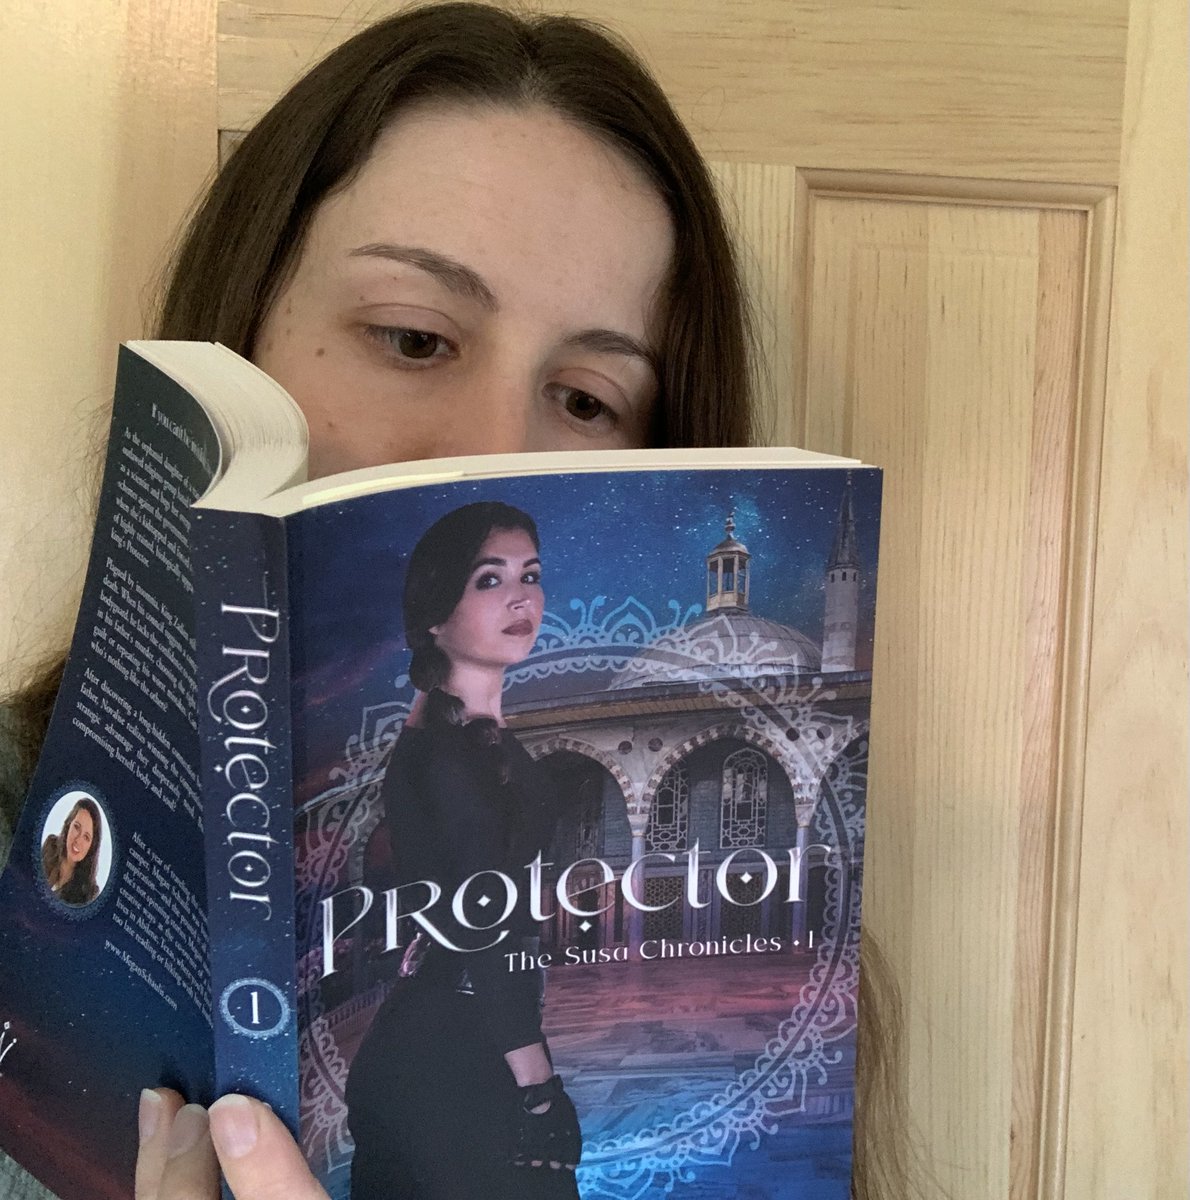 Happy release day to @MeganSchaulis and Protector! I had a hard time putting this one down! But who needs sleep anyway? 🤷‍♀️😆

#releaseday #YAfiction #Christianfiction #protectorya